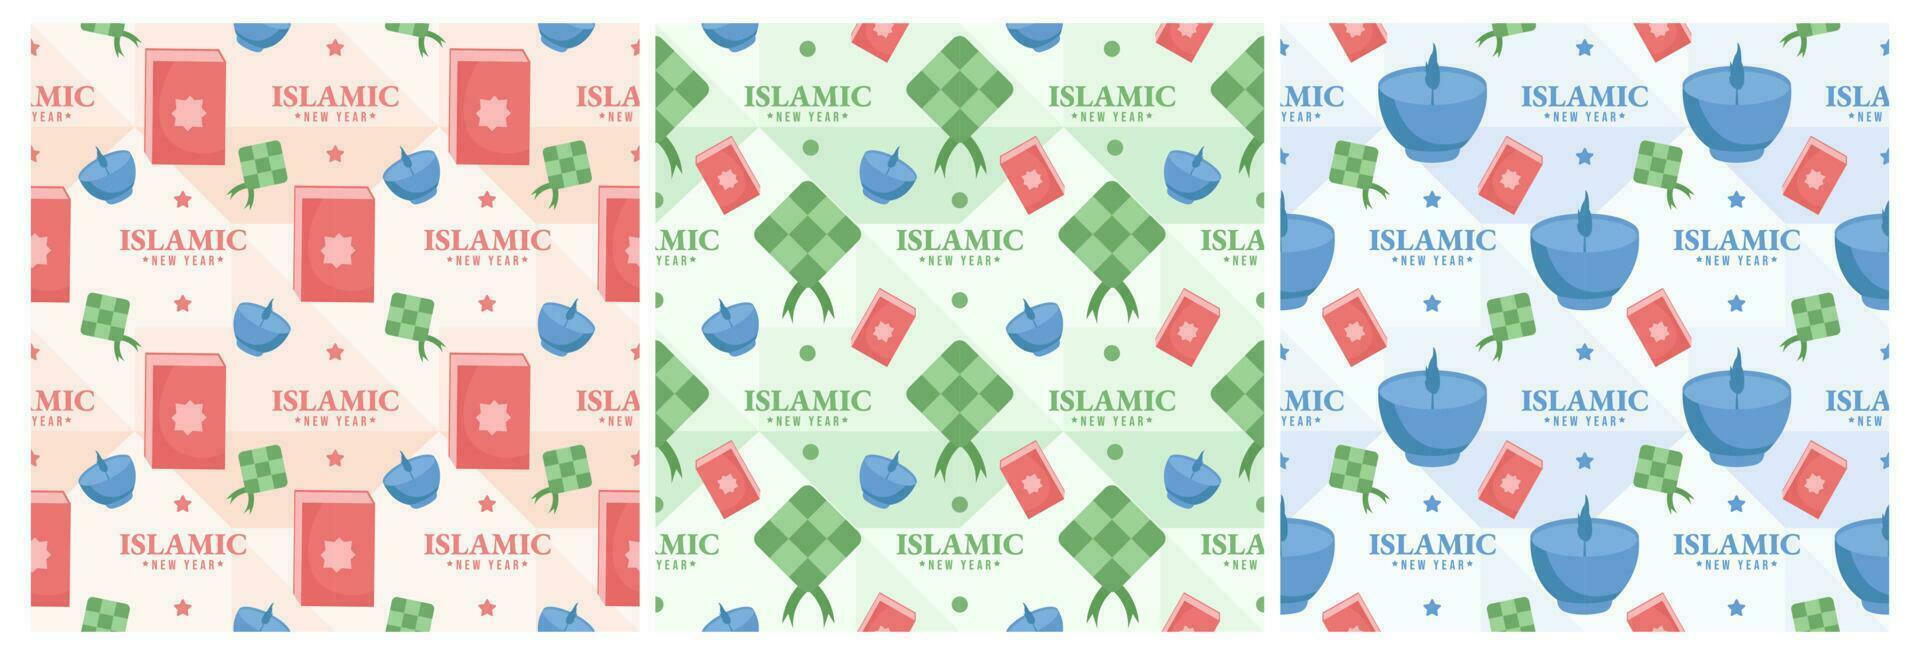 Set of Happy Islamic New Year Seamless Pattern Design Flat Illustration with Muslims Elements in Template Hand Drawn vector